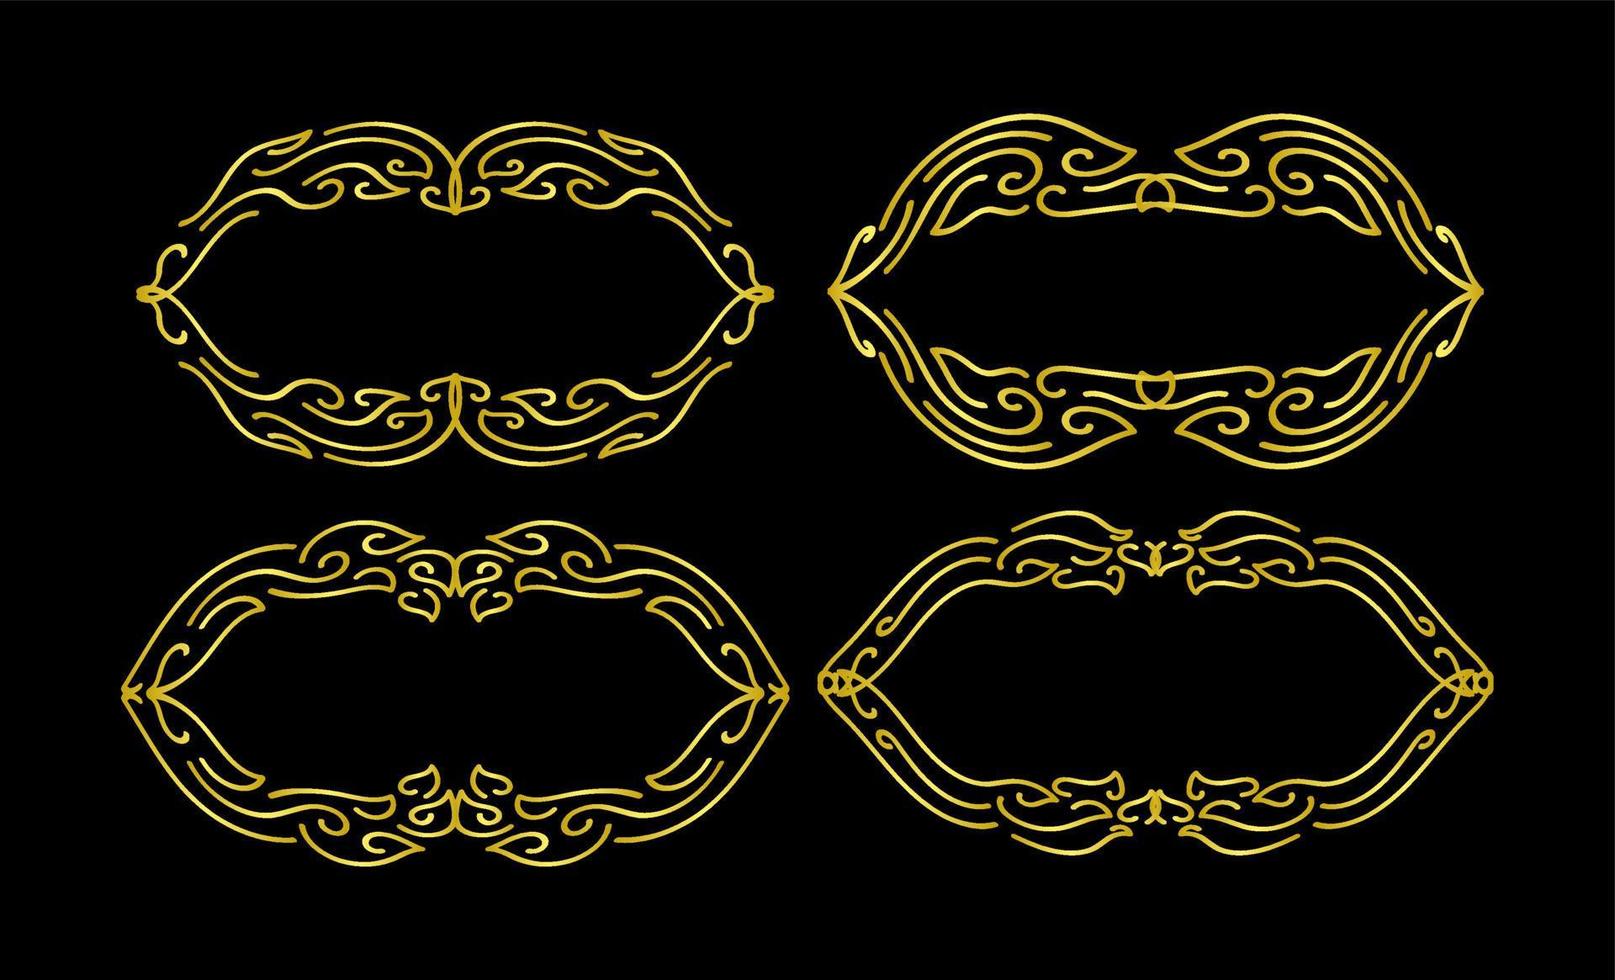 Gold Borders Elements Set Collection, ornament Vector, frame vector